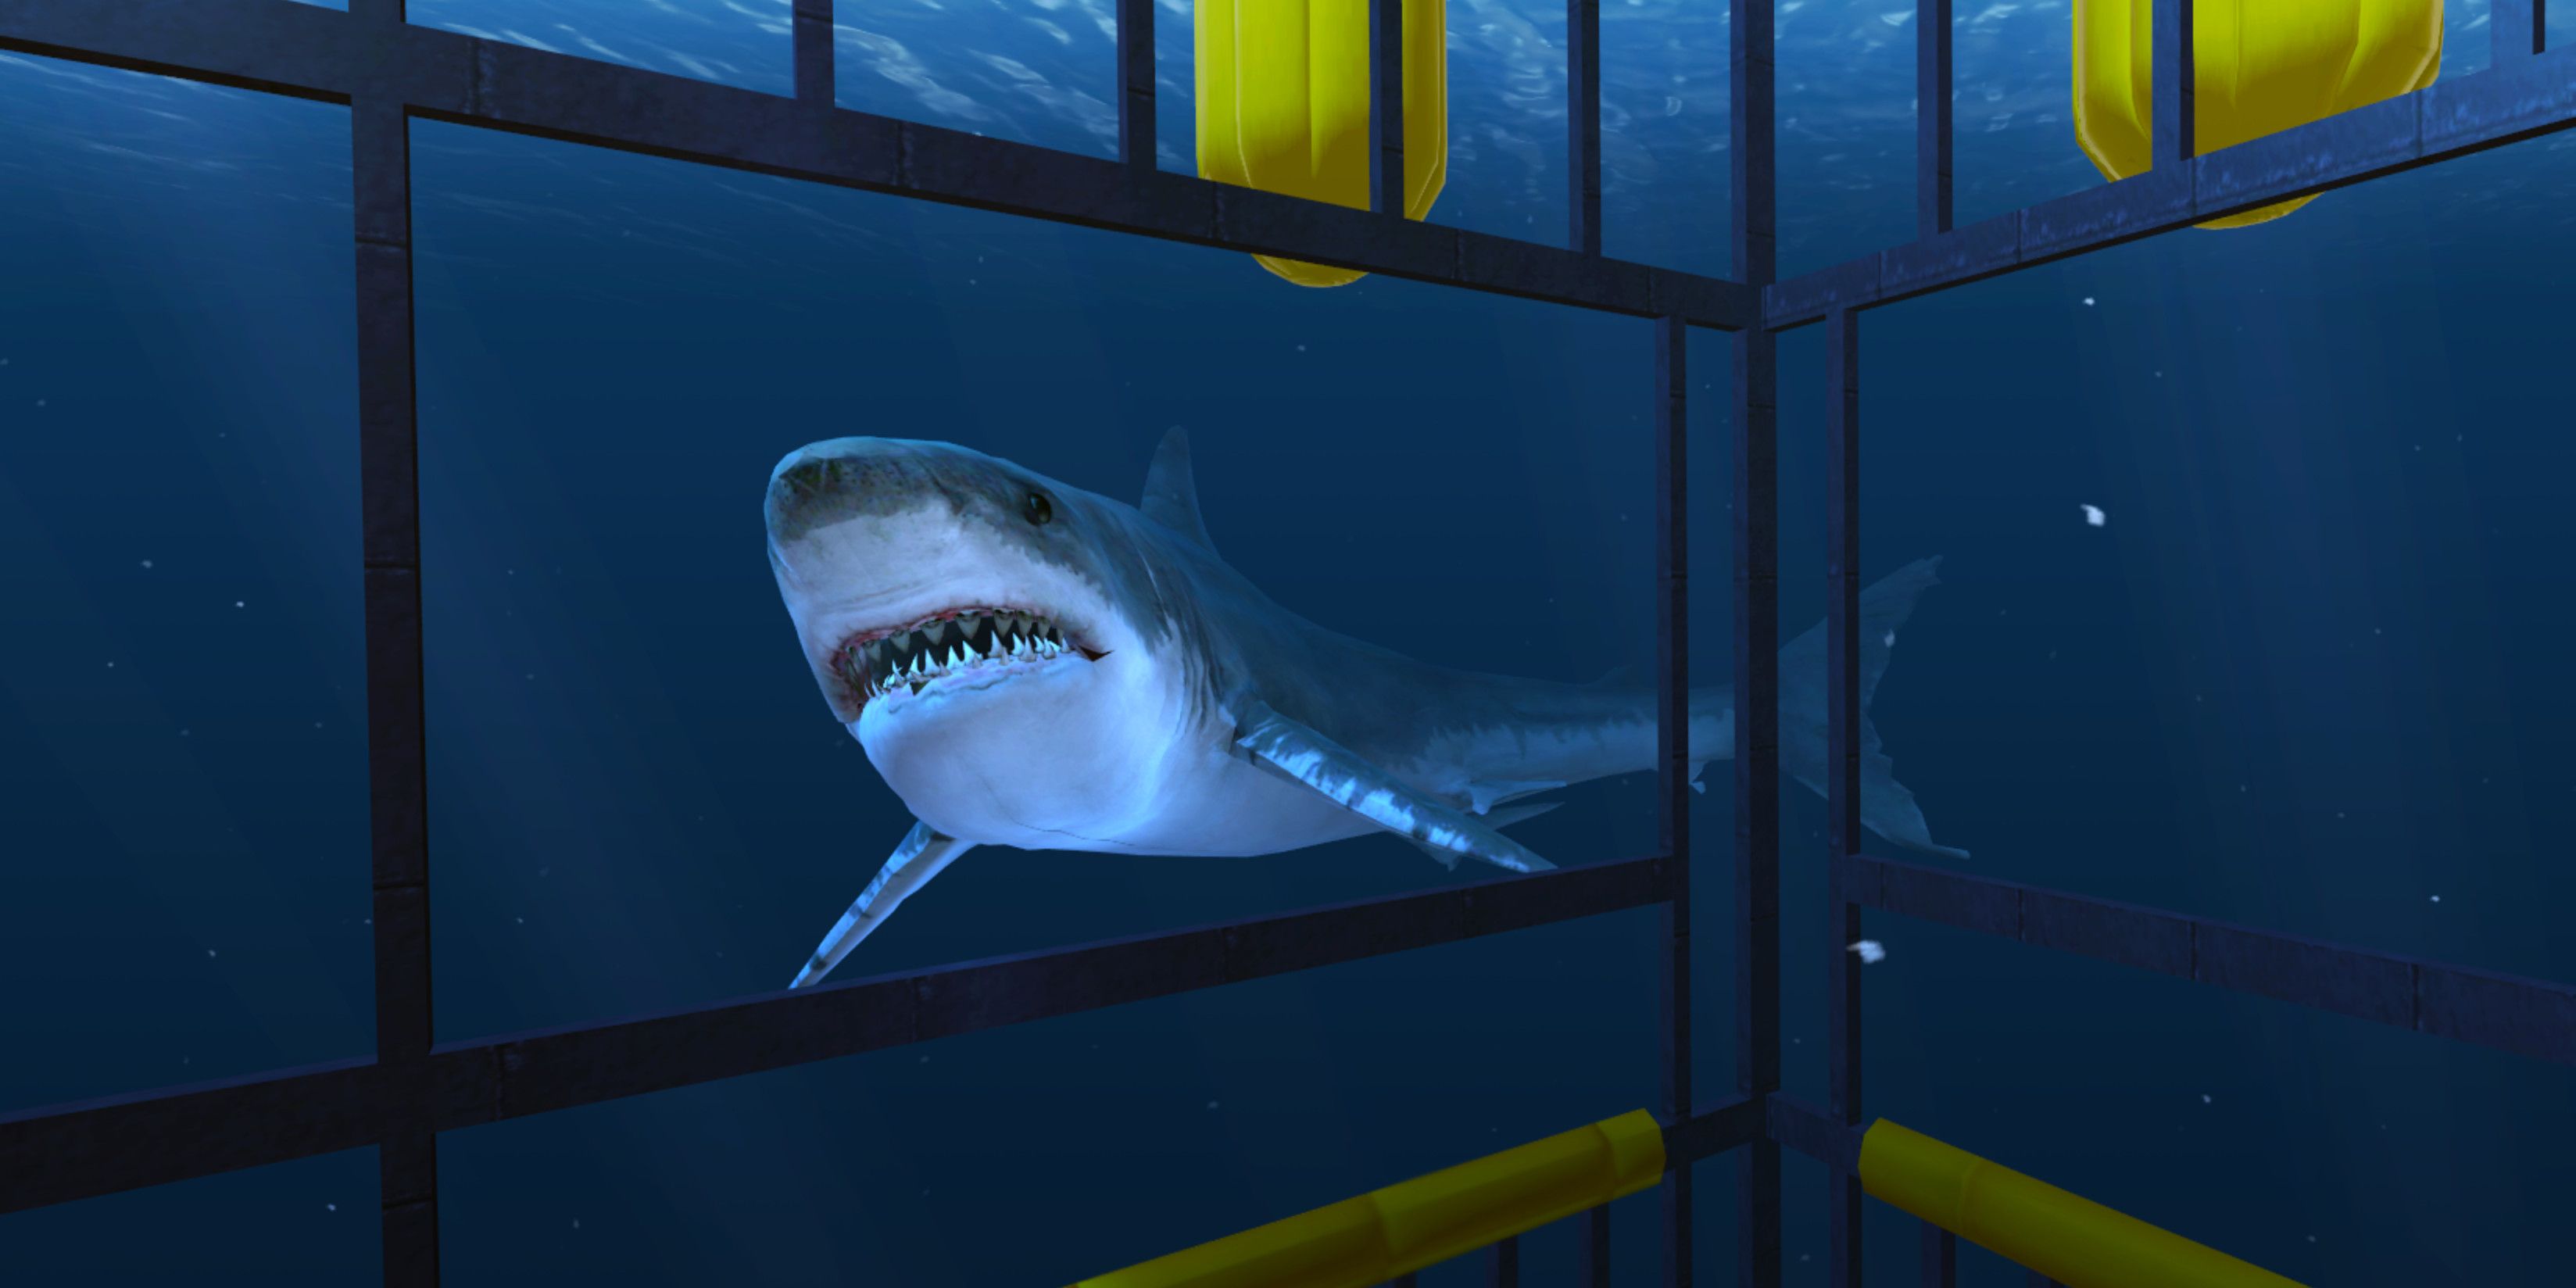 Player looking at a great white shark from inside diver's cage